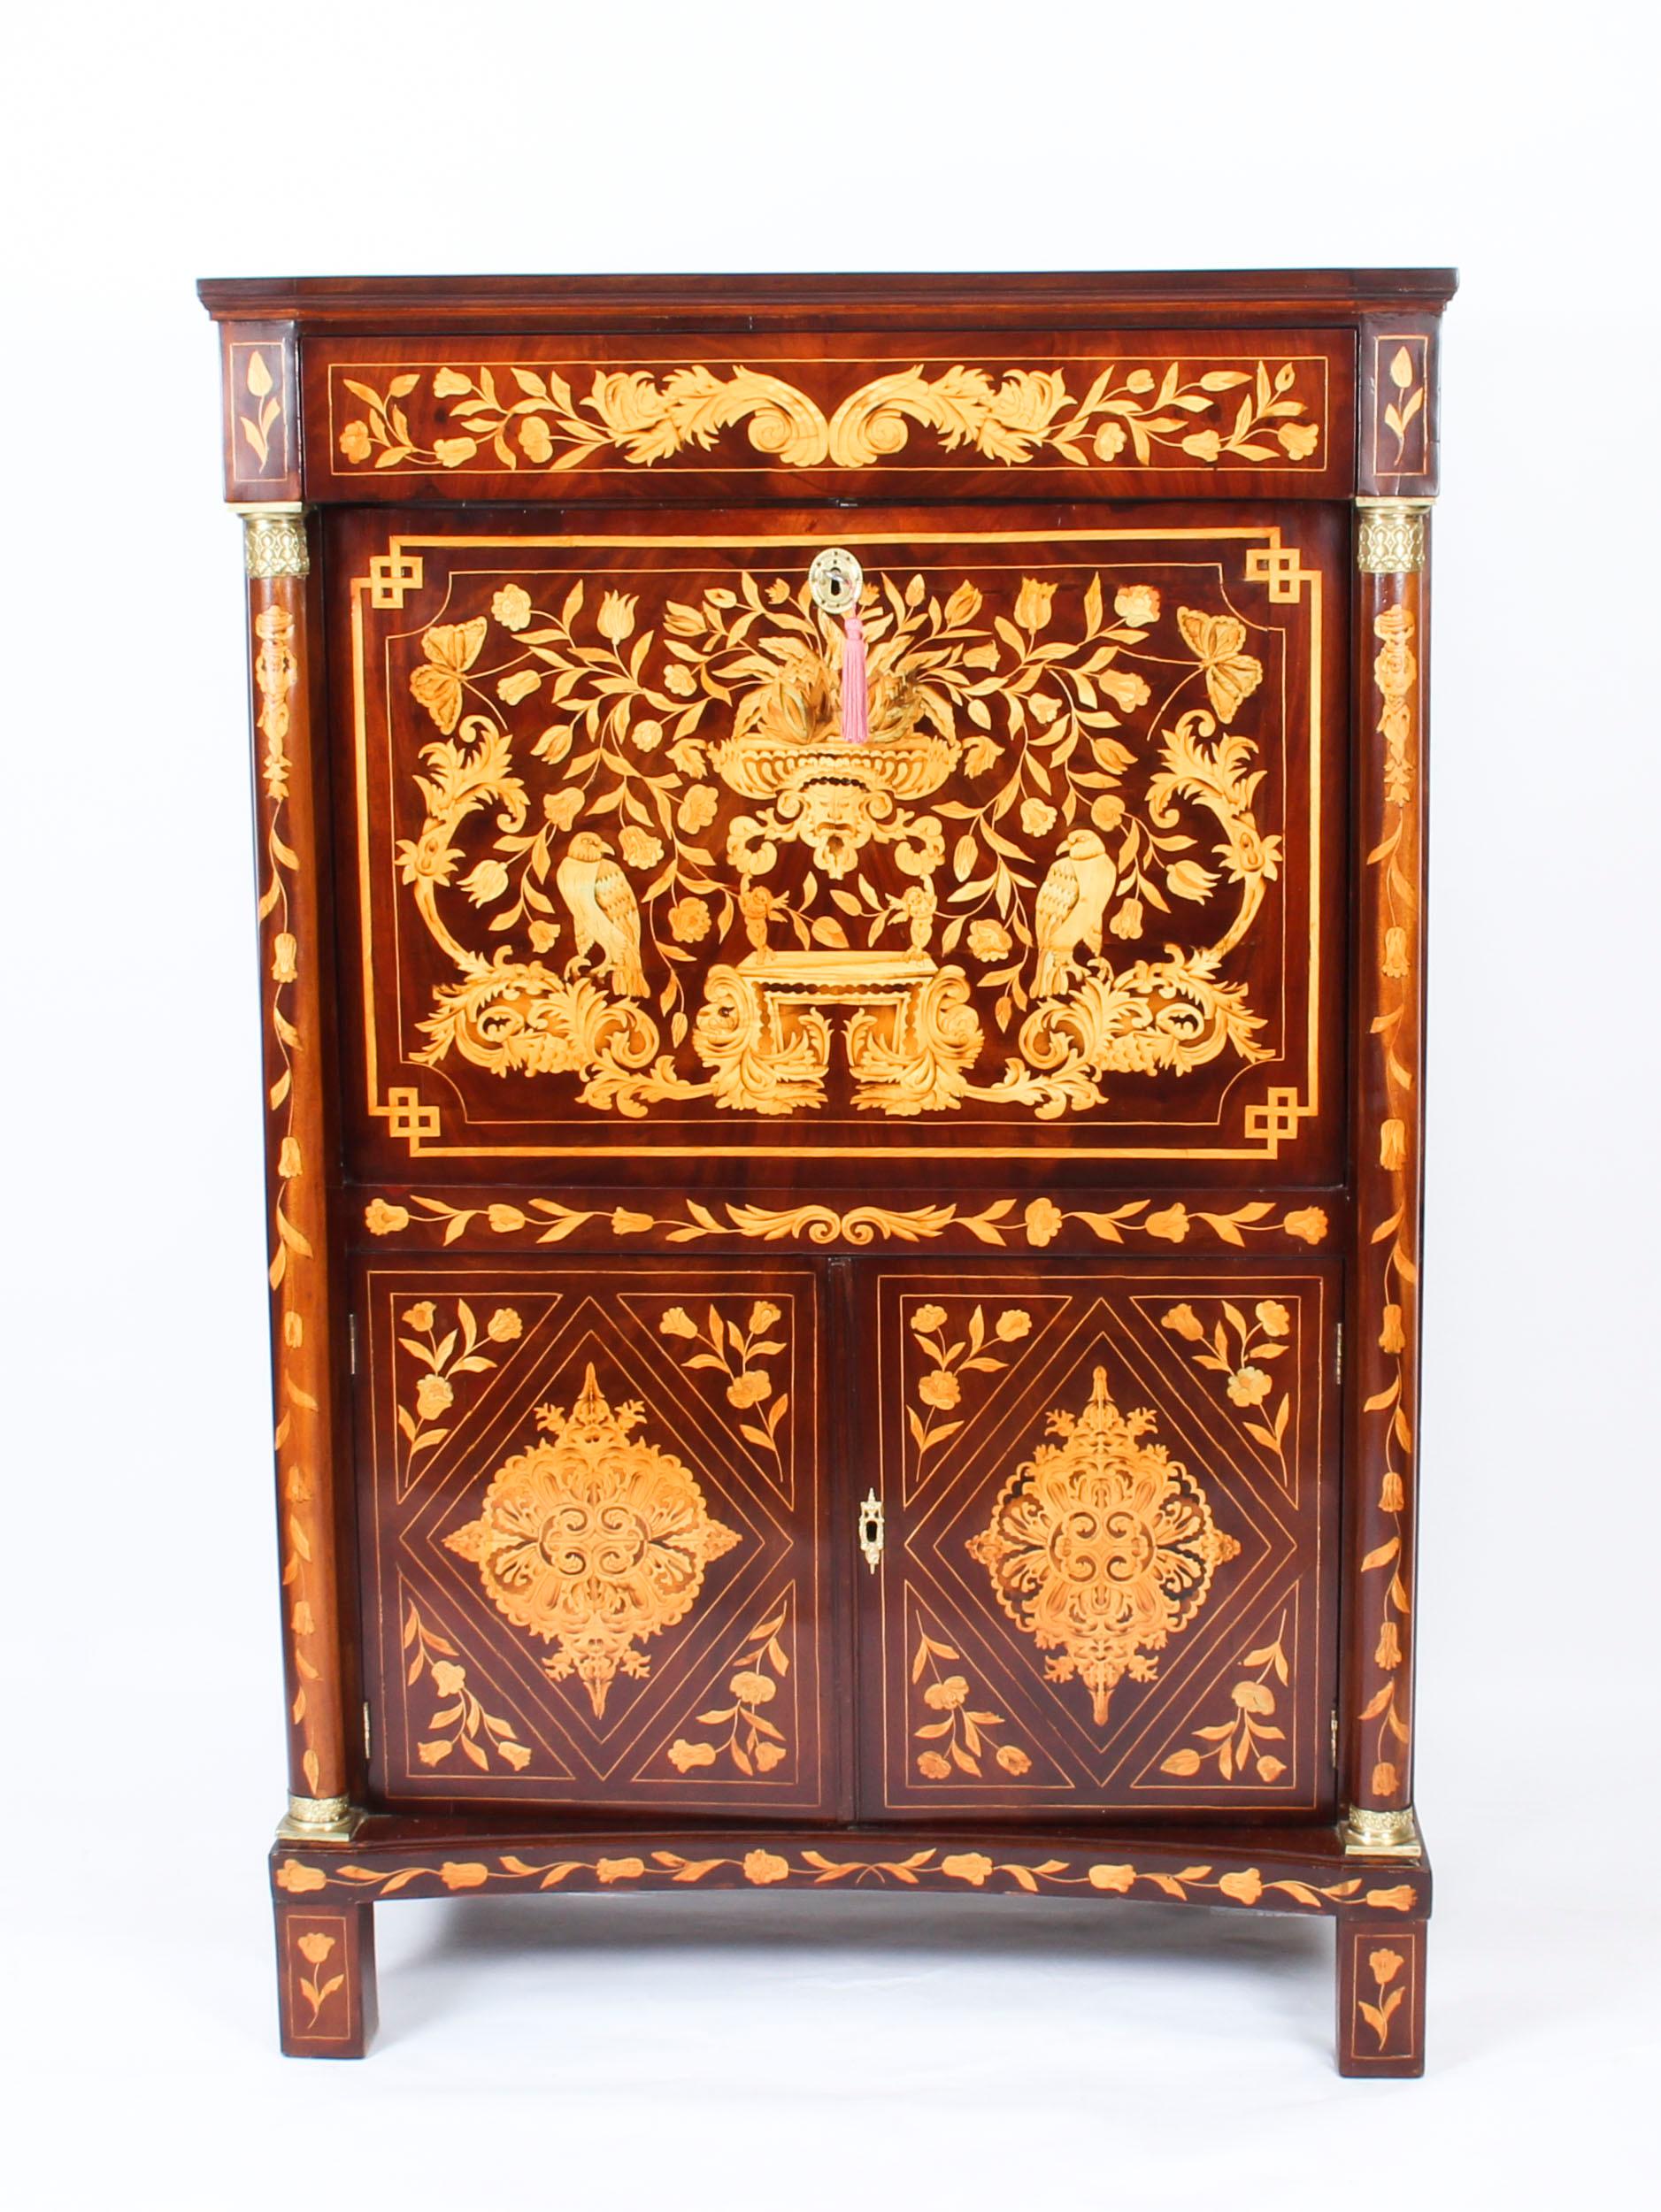 This is an impressive antique Dutch marquetry walnut secretaire à Abattant - fall front desk, which dates from circa 1780.
This impressive antique Dutch walnut secretaire is exquisitely adorned with a plethora of intricate marquetry decoration